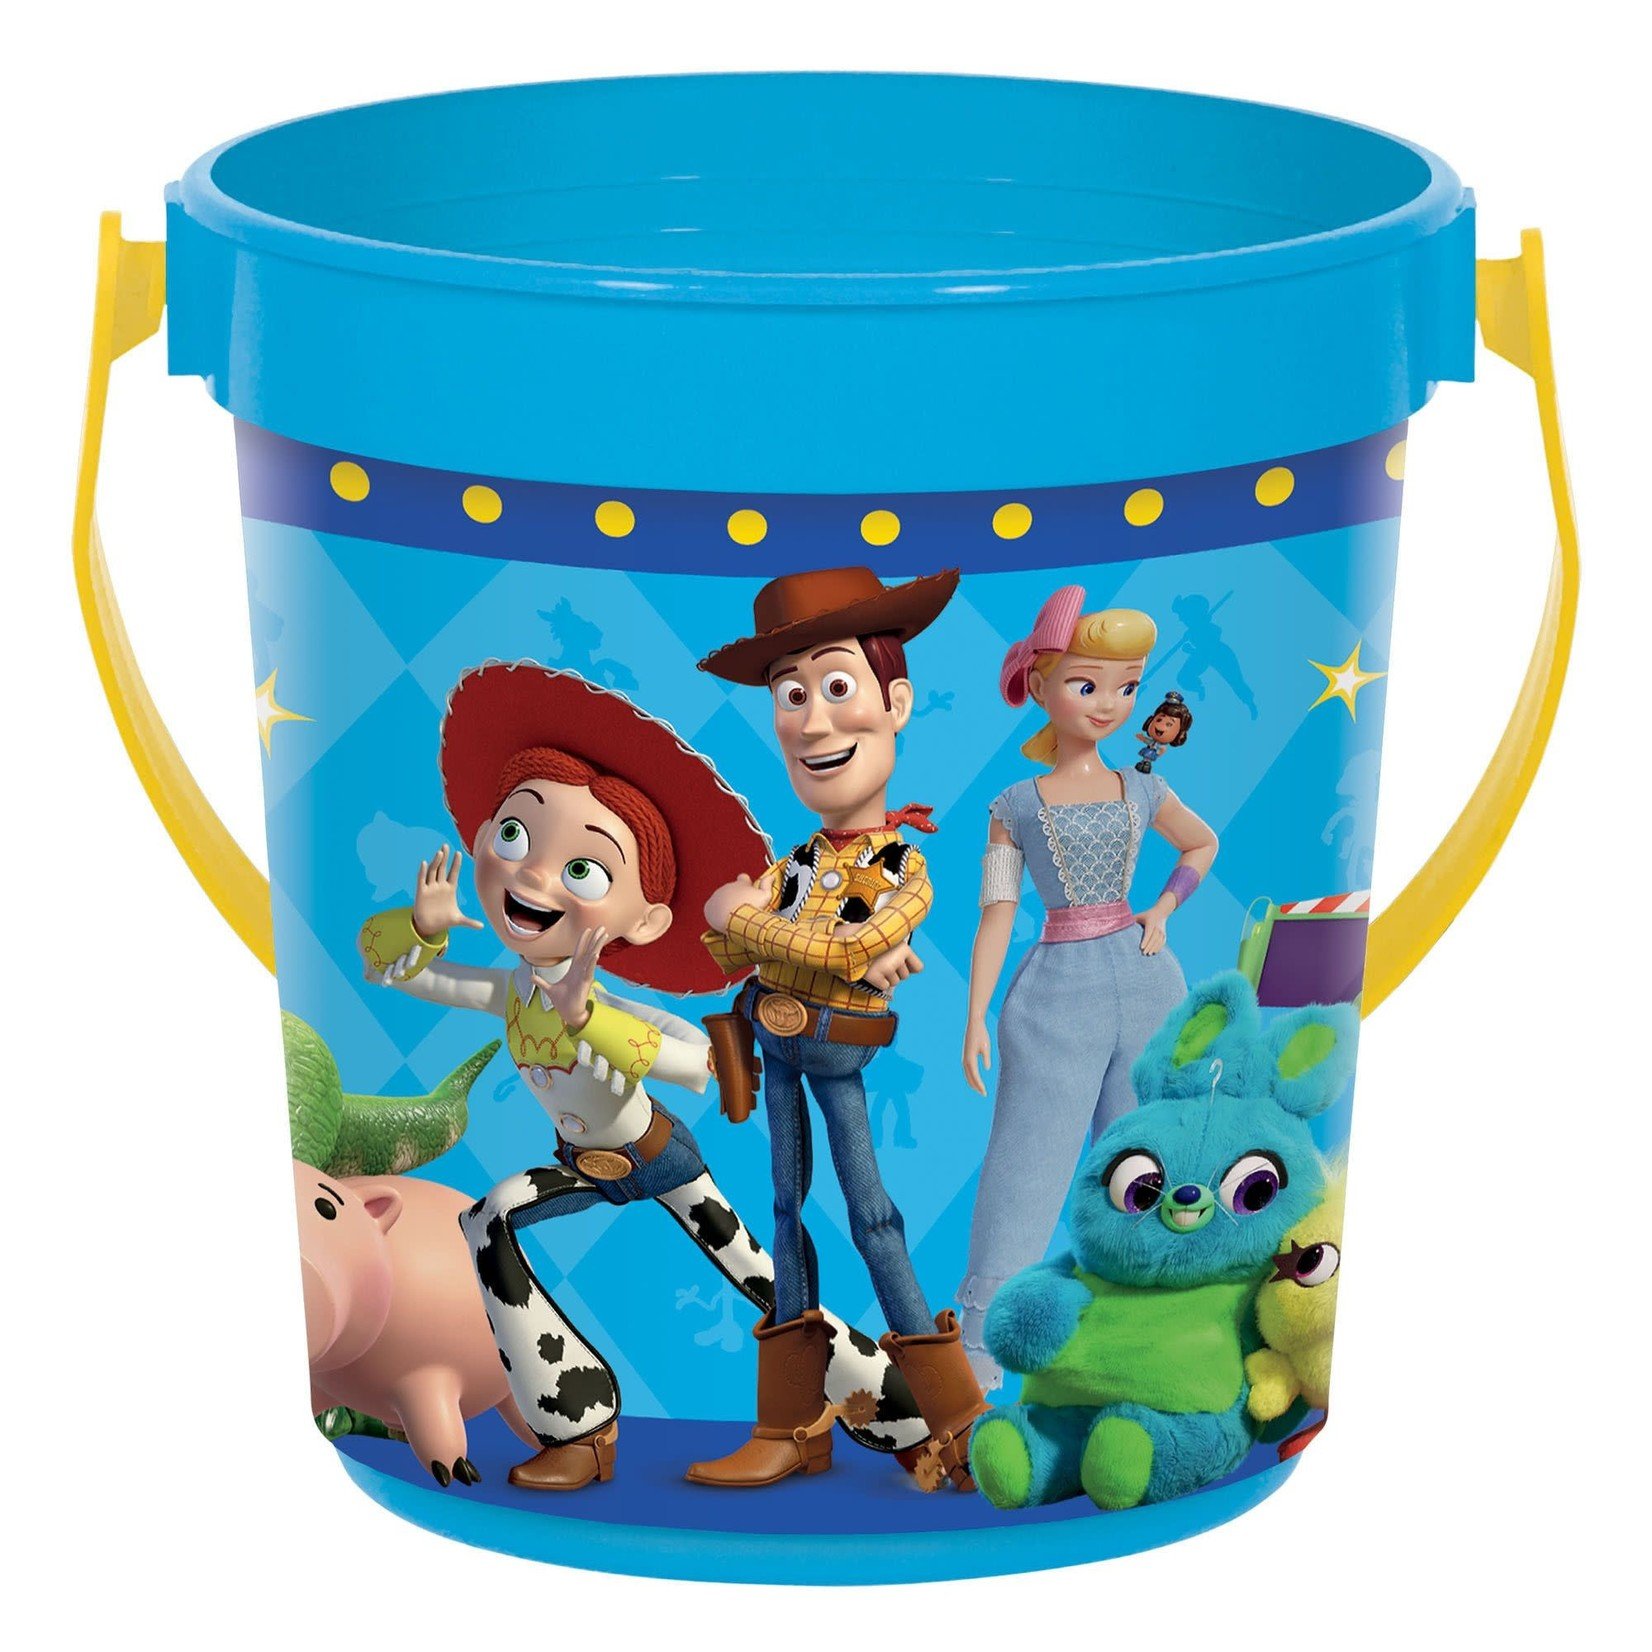 Pixar Toy Story 4 Favor Container